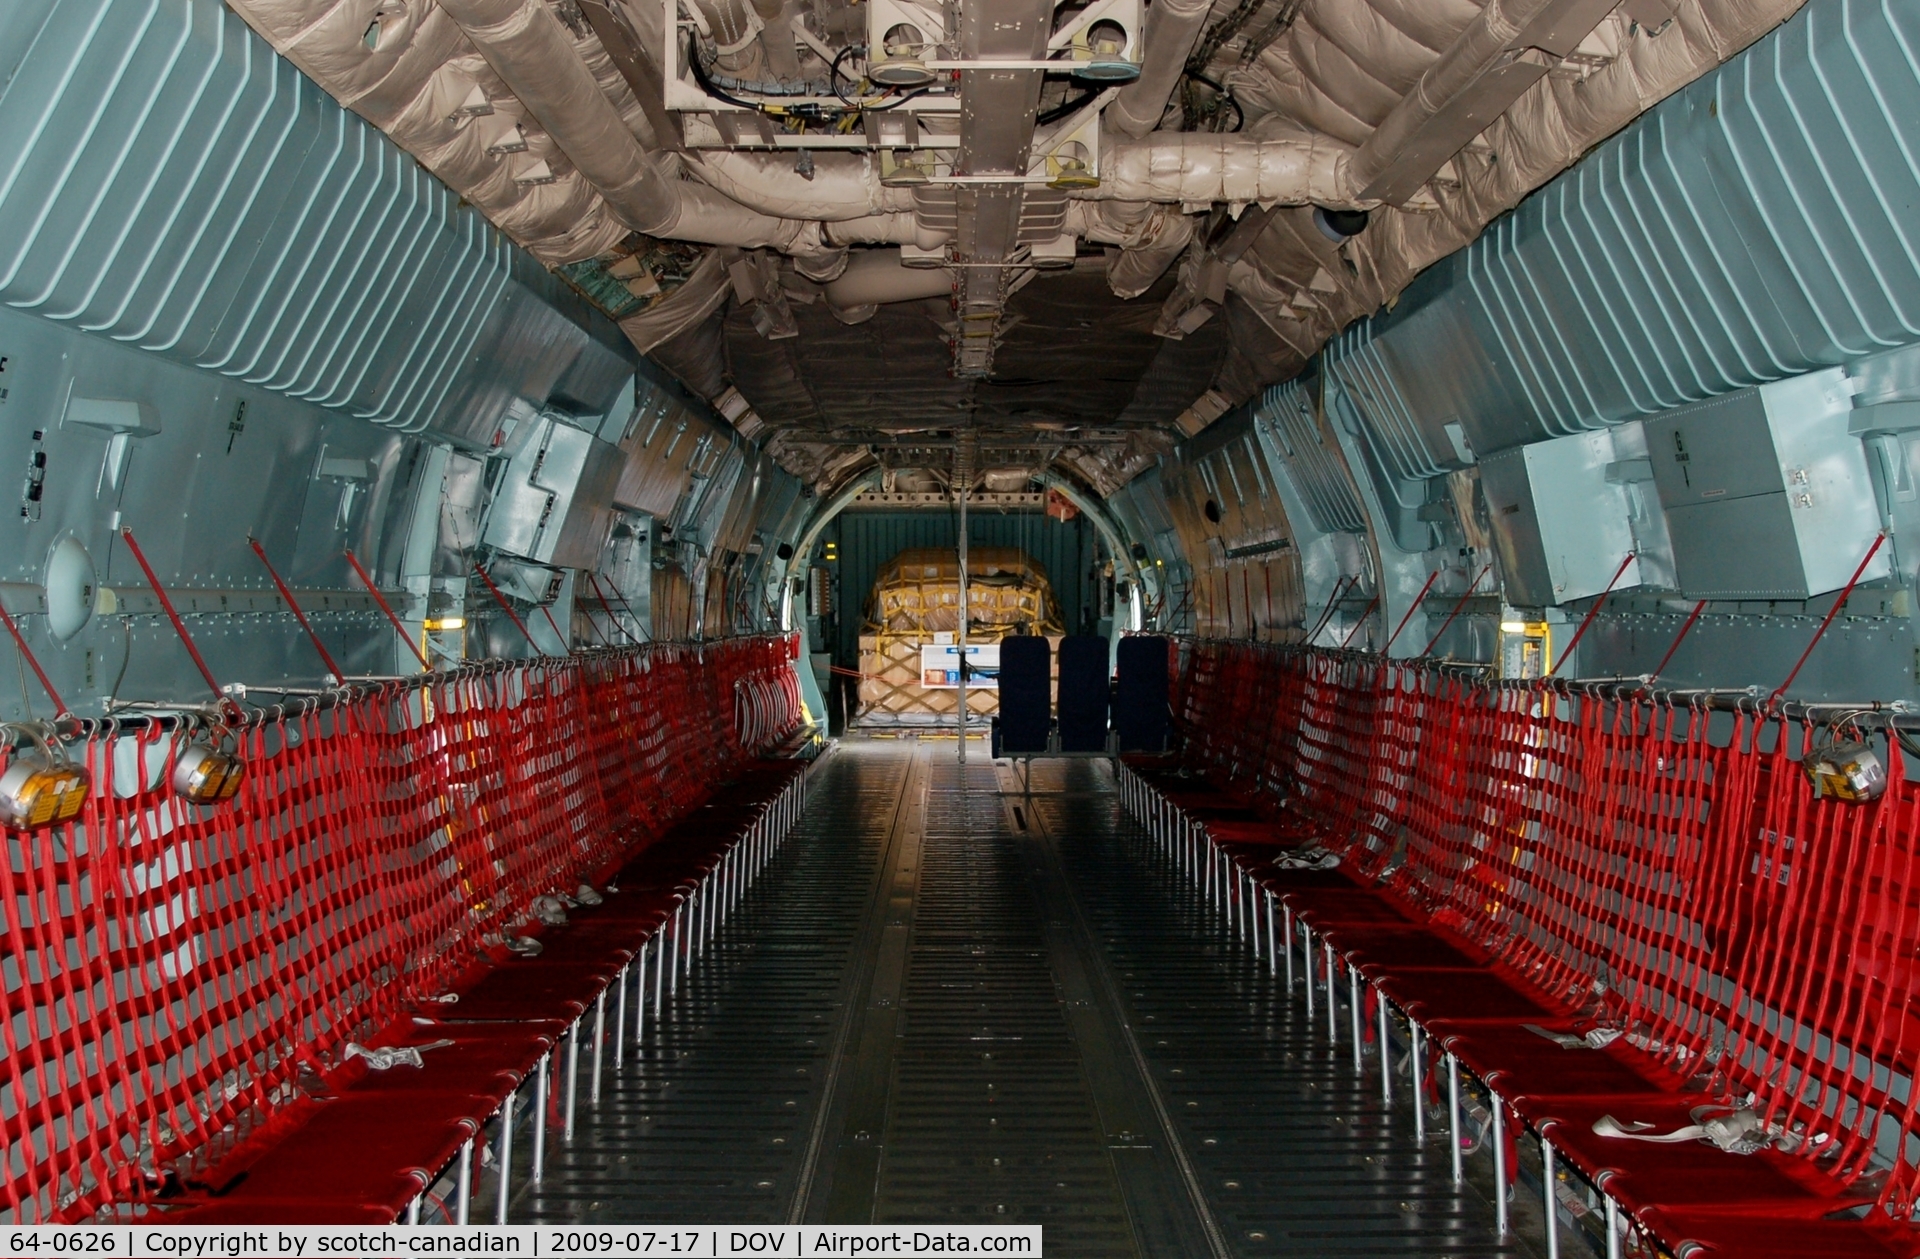 64-0626, 1964 Lockheed C-141B Starlifter C/N 300-6039, Interior of 1964 Lockheed C-141B Starlifter Cargo Bay at the Air Mobility Command Museum, Dover AFB, Dover, DE